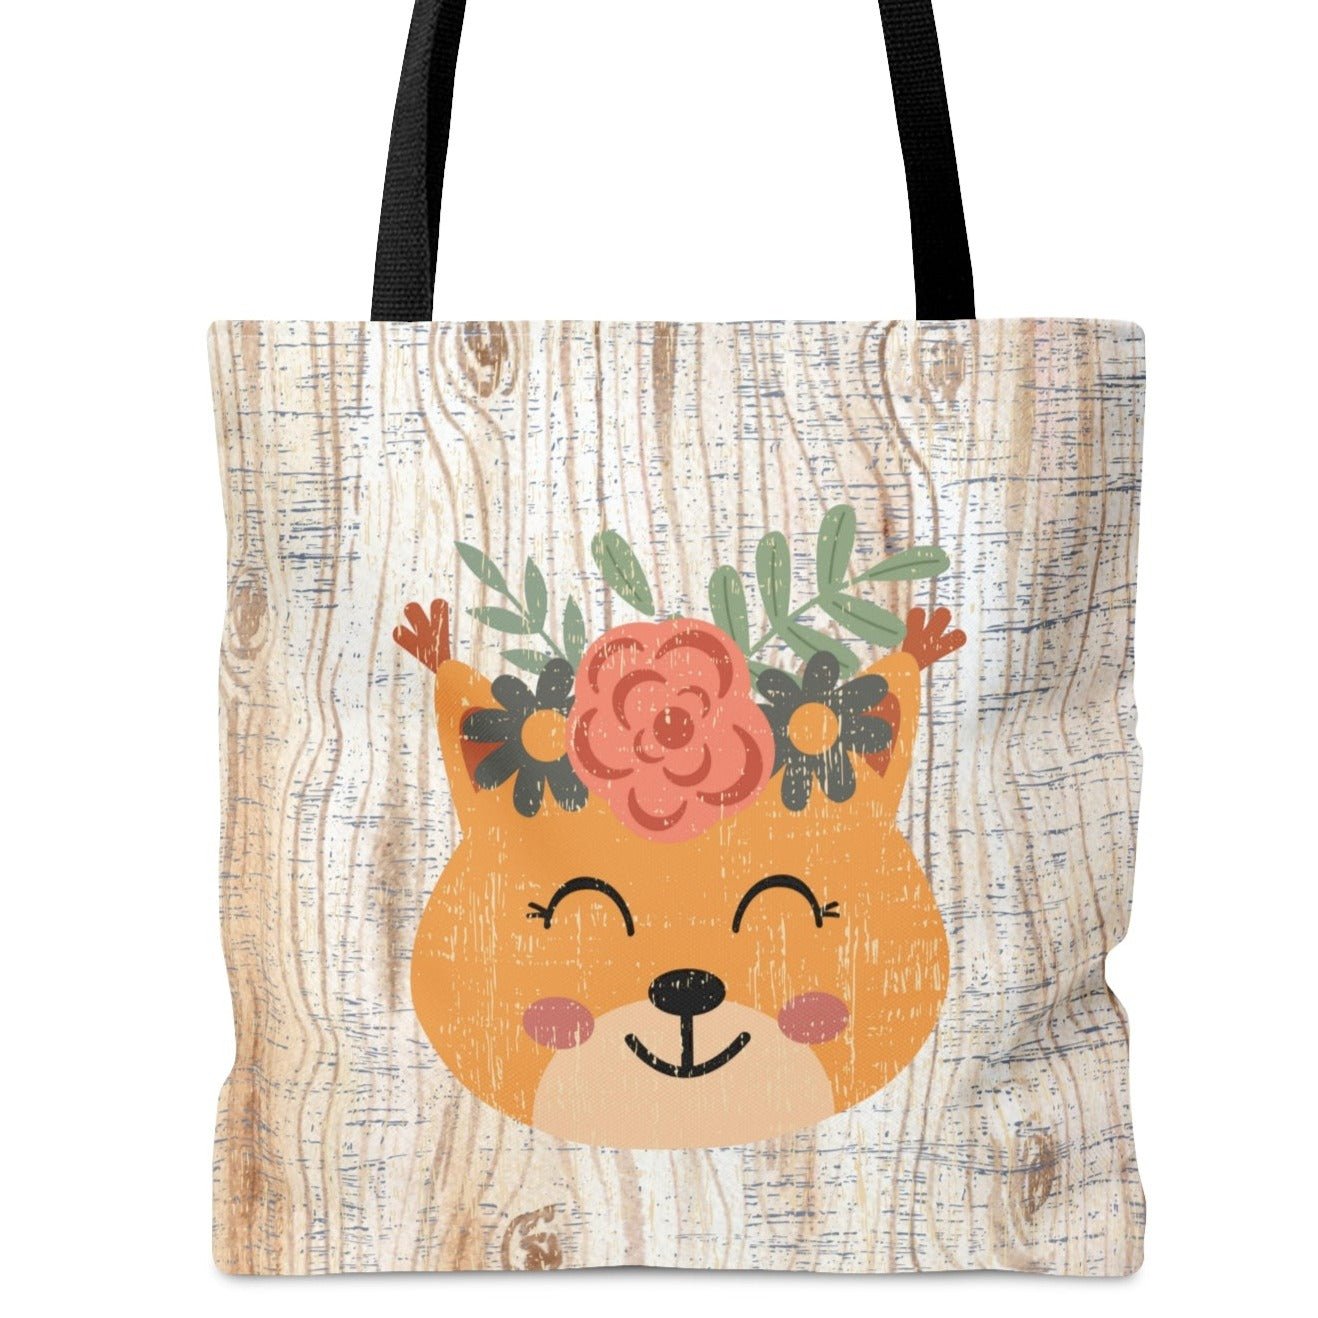 Bear with Flowers on White Wood Background Large Tote Bag - Whimsical Nature-Inspired Accessory - Eddy and Rita